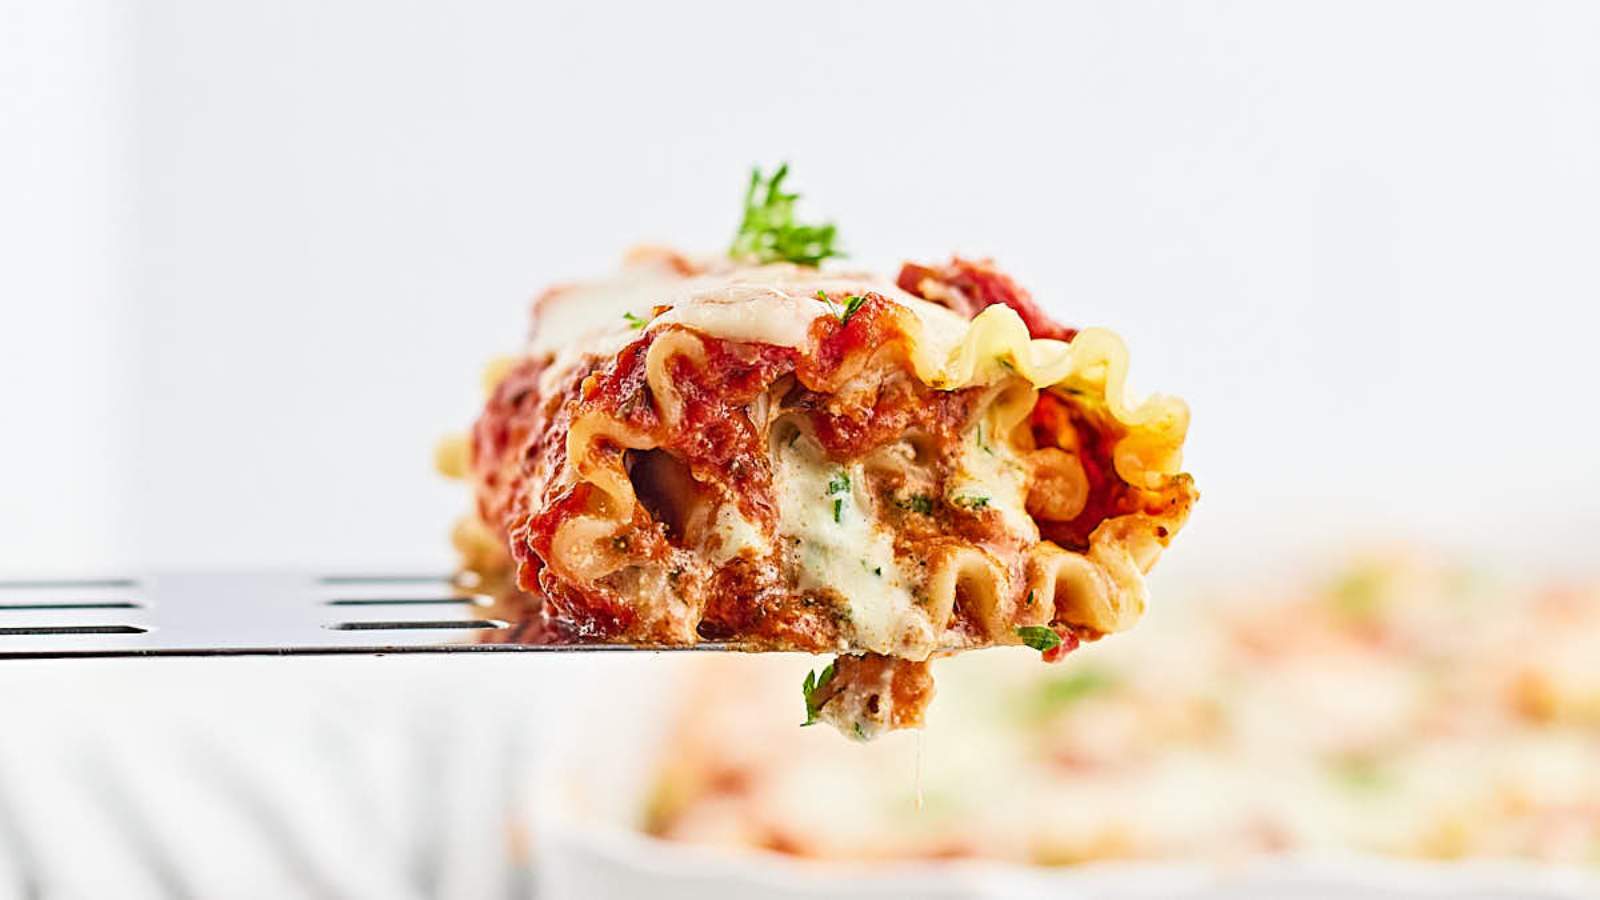 Lasagna Roll-Ups recipe by Cheerful Cook.